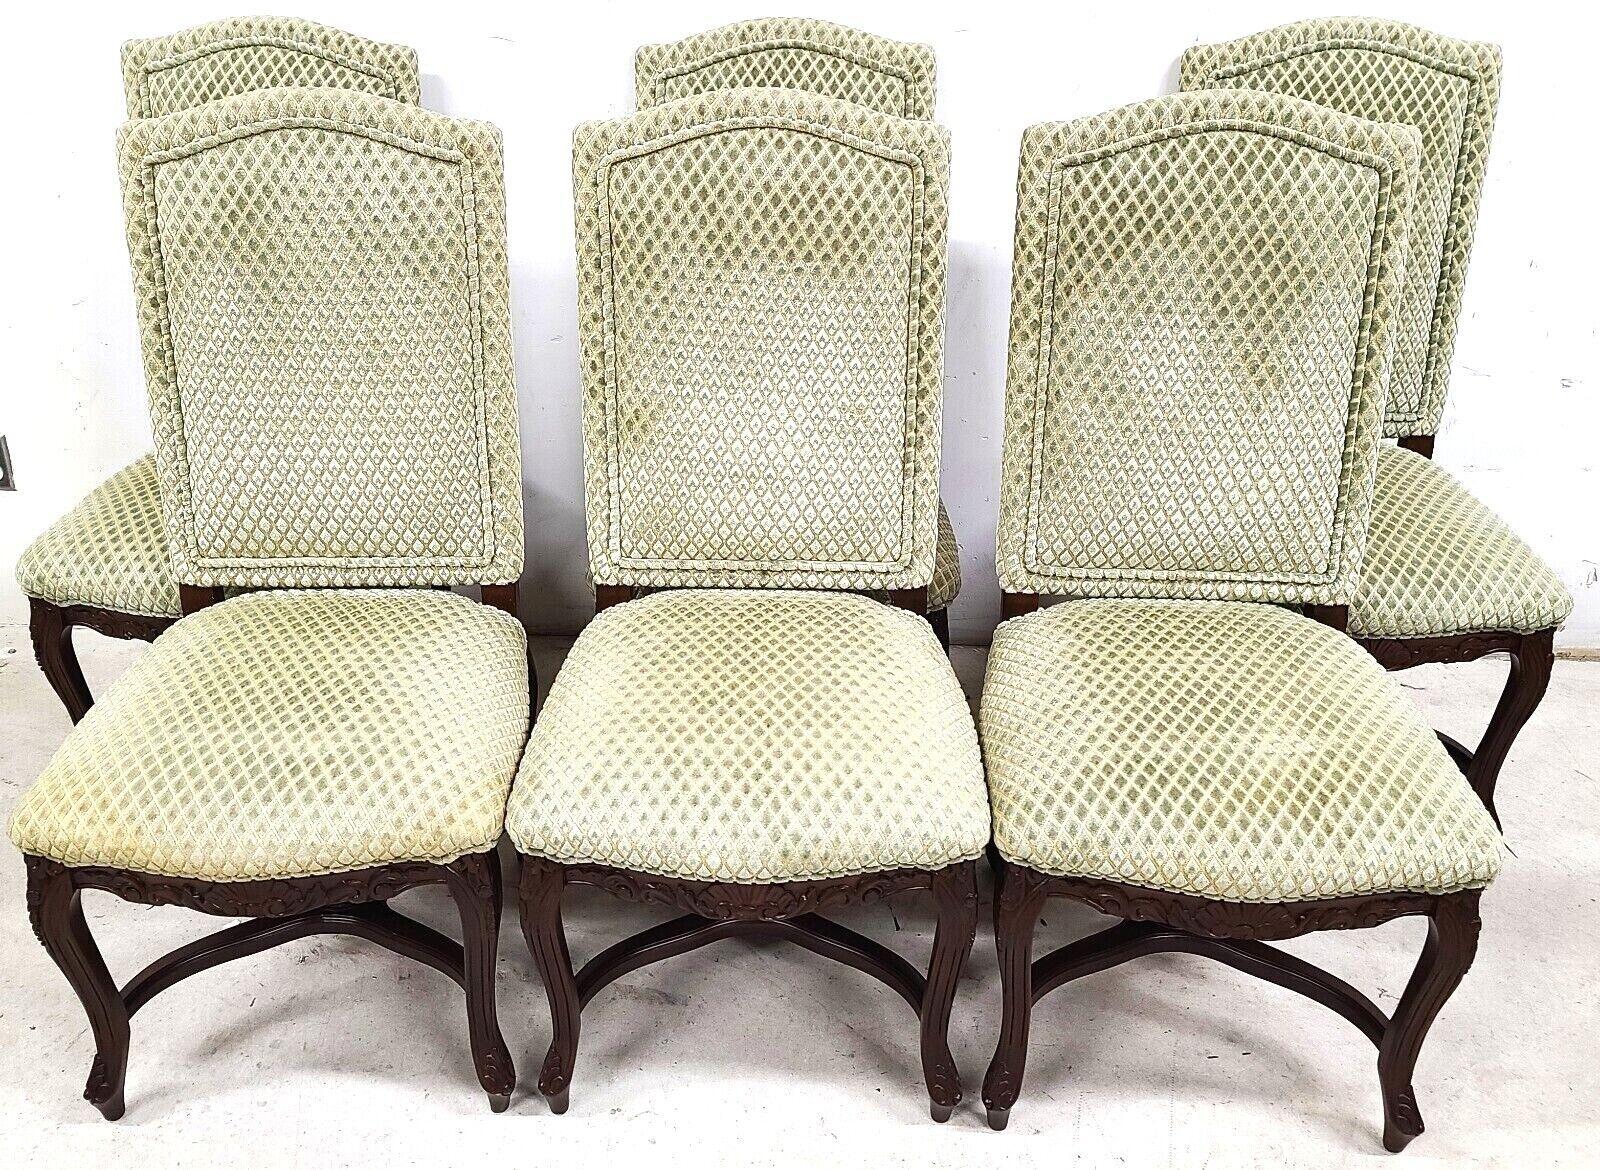 For FULL item description be sure to click on CONTINUE READING at the bottom of this listing.

Offering one of our recent Palm Beach estate fine furniture acquisitions of a
set of 6 vintage French provincial velvet dining chairs
With carvings in